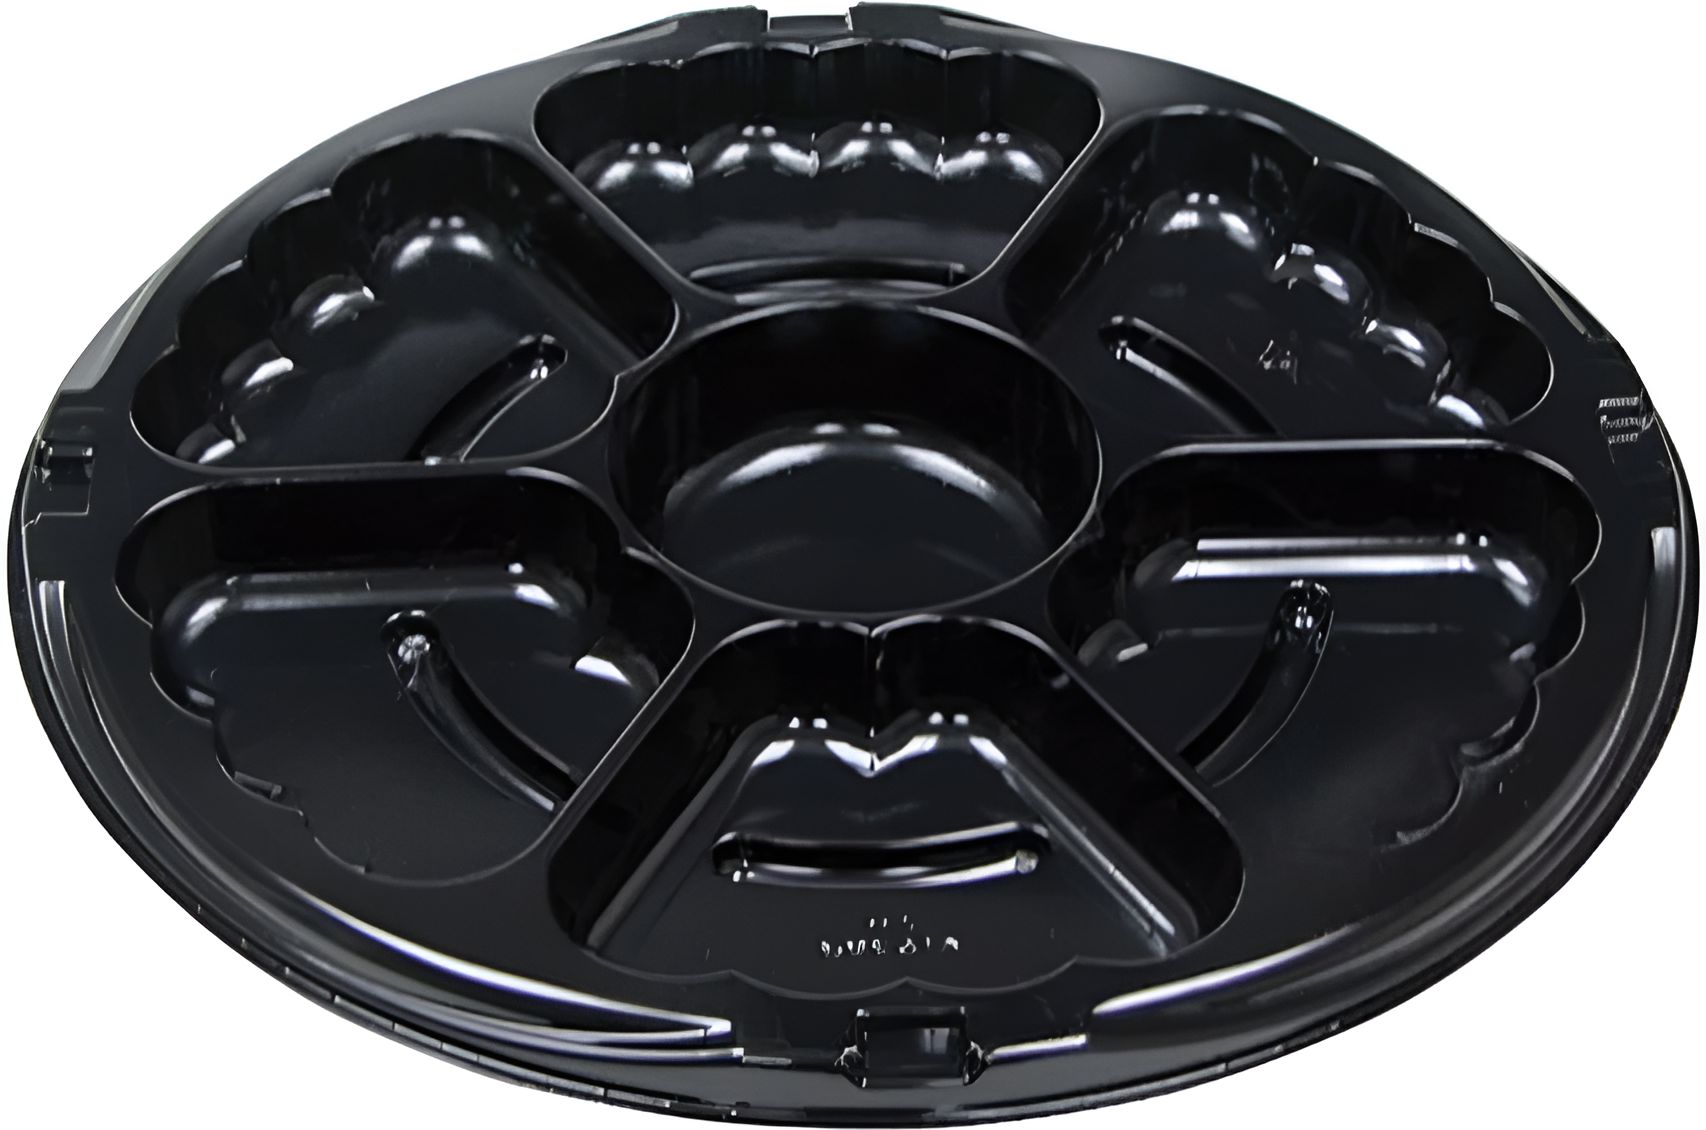 Pactiv Evergreen - 16" Black Round 7-Compartment Catering Tray, 50/Cs - 9916KY